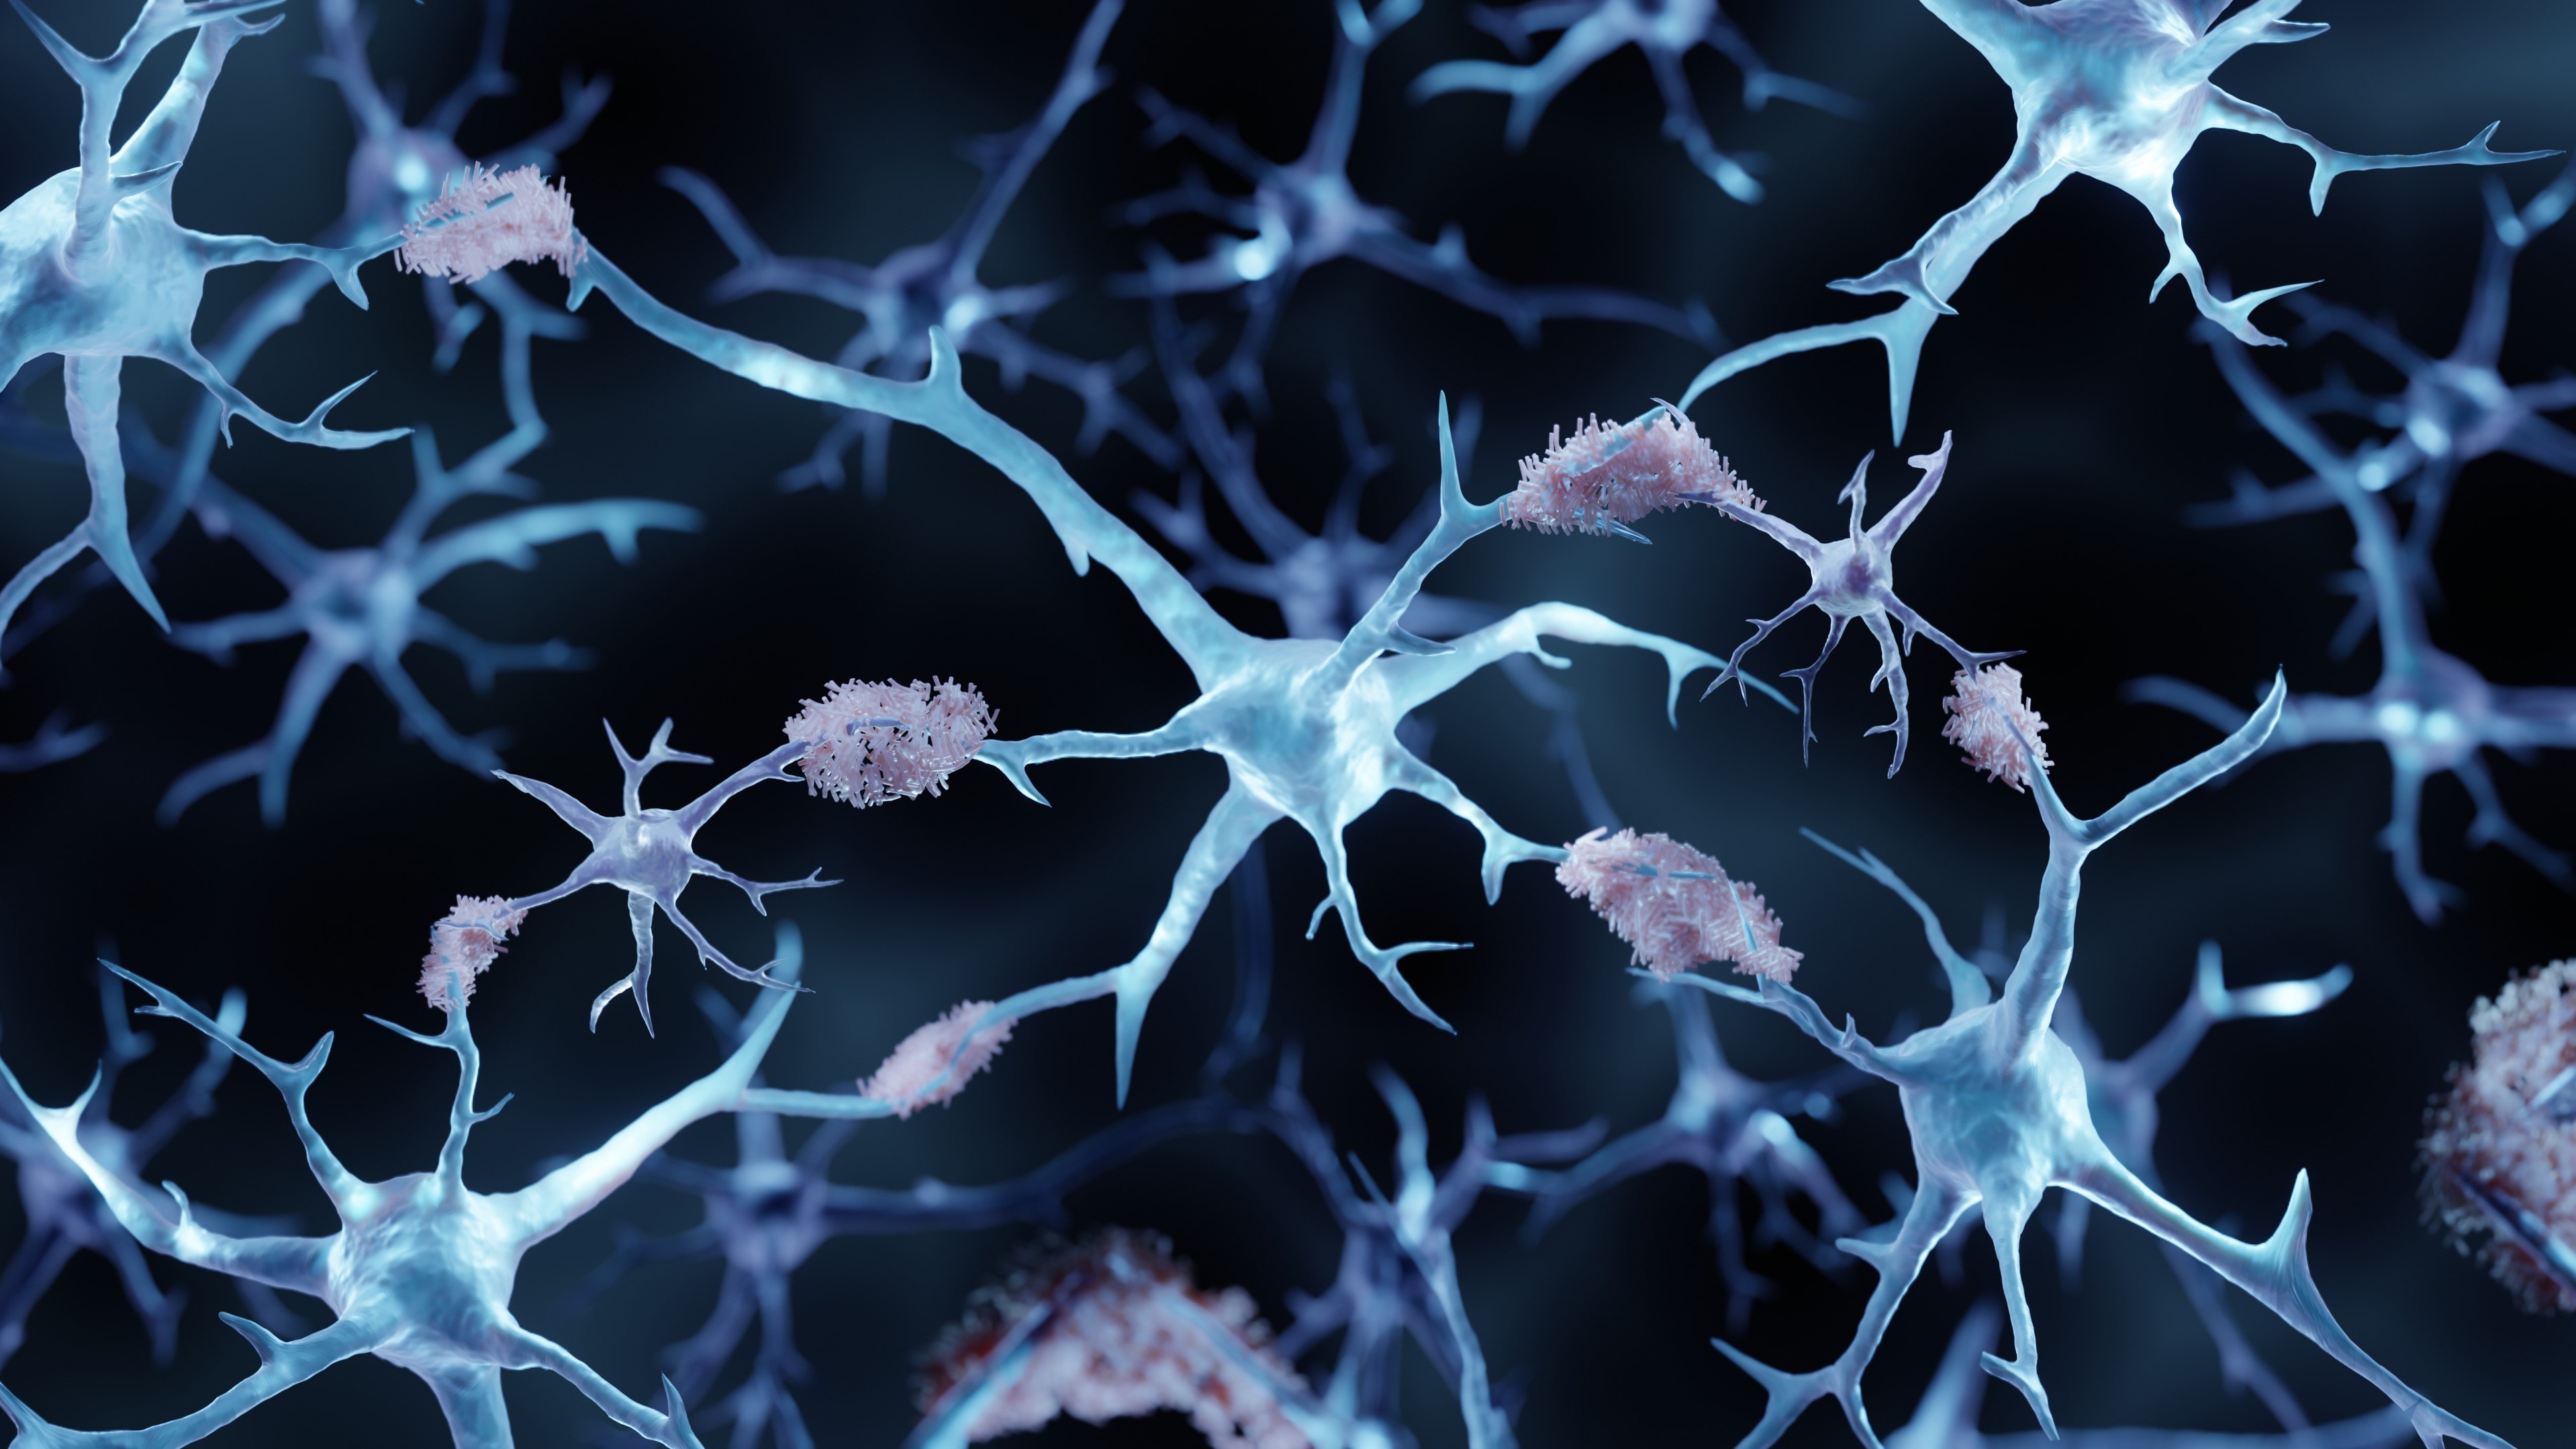 Returning the complement: Protein's role in pathway could bolster new Alzheimer's approach